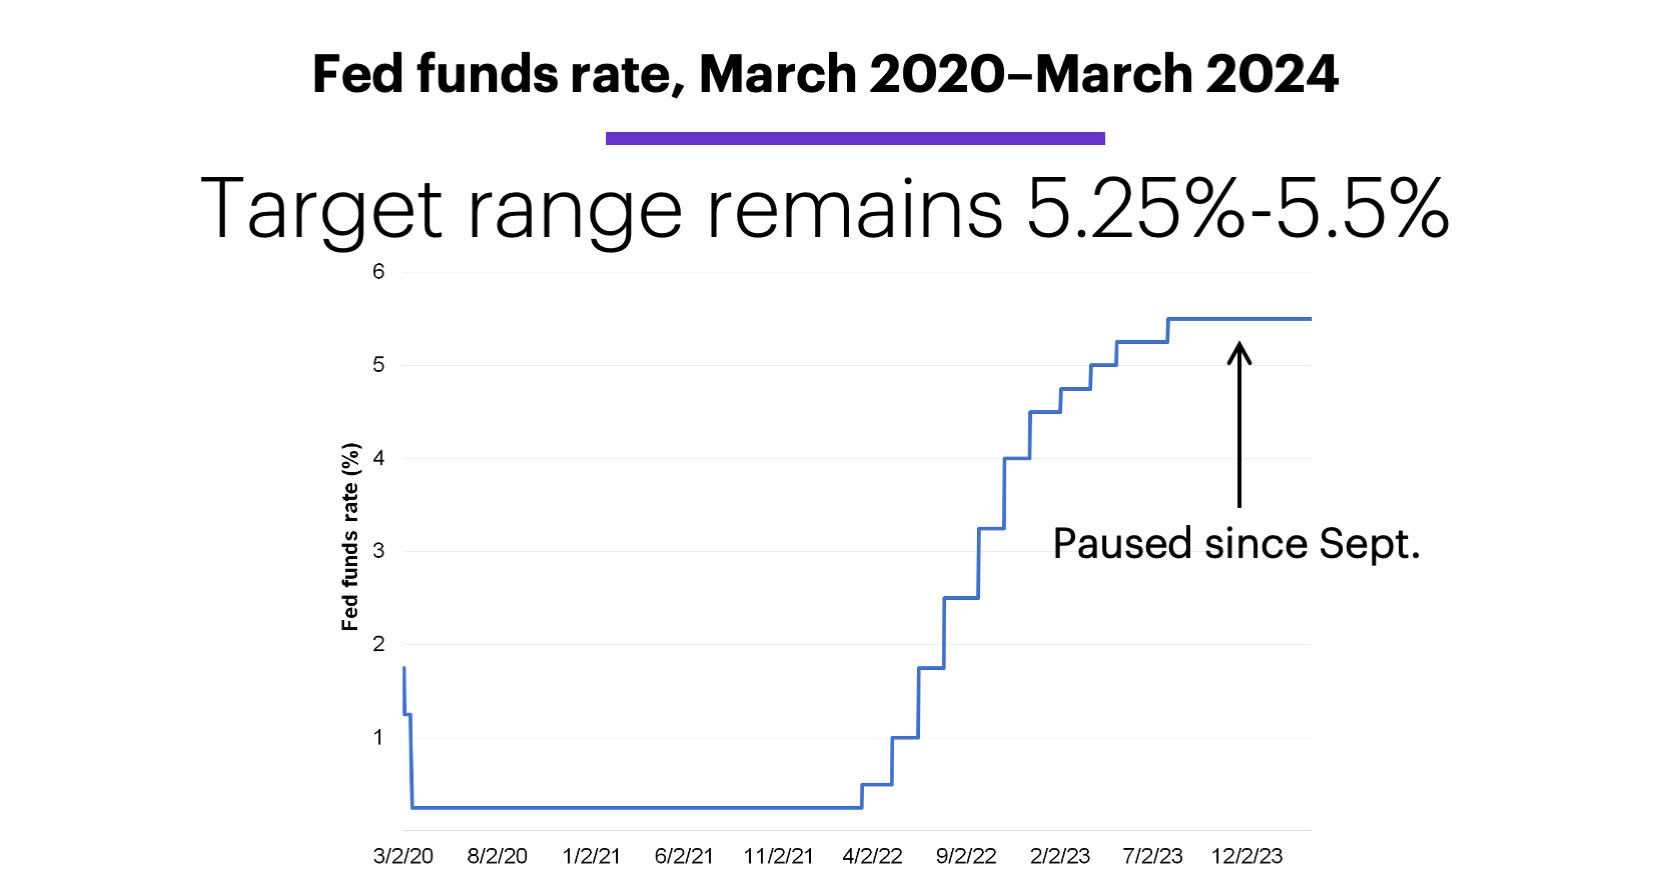 Chart 1: Fed funds rate, March 2020–March 2024. Target range remains 5.25%-5.5%.